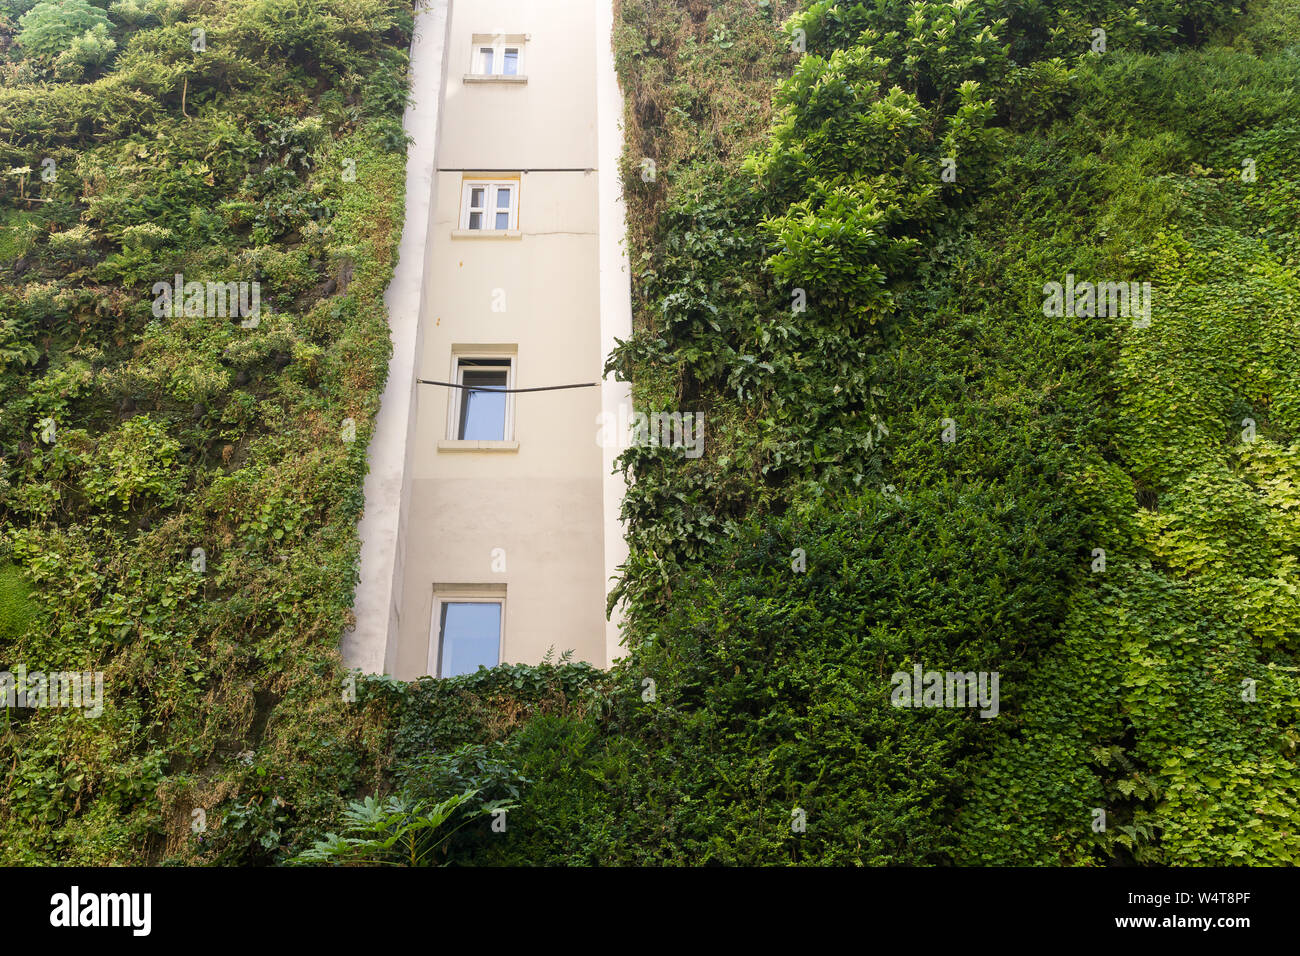 Living wall Paris - Vertical garden made by Patrick Blanc on Rue d'Alsace in Paris, France, Europe. Stock Photo